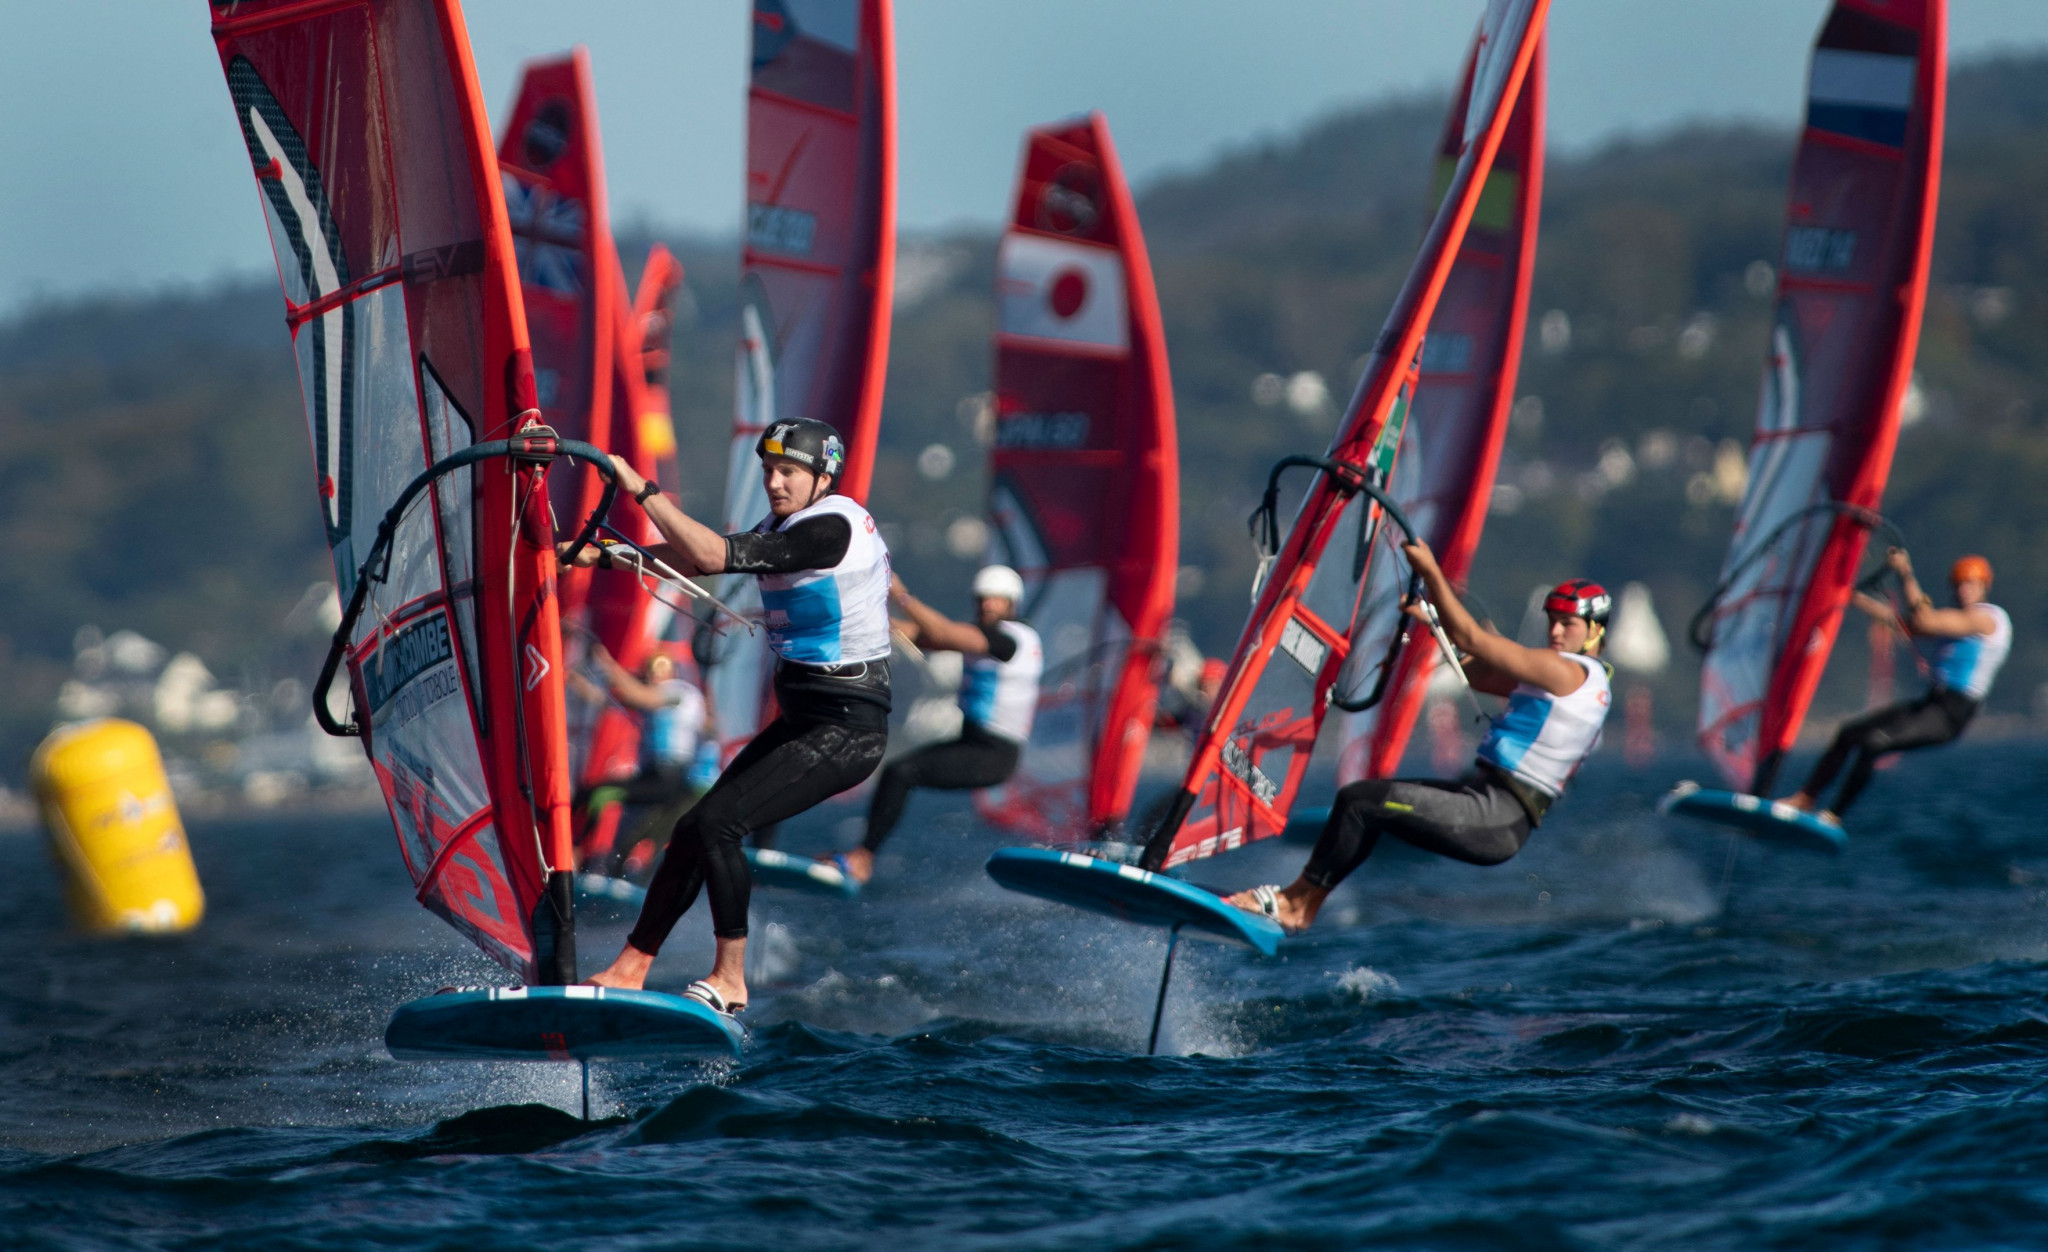 Koerdel and Maggetti in pole for medal races at iQFOiL World Championships